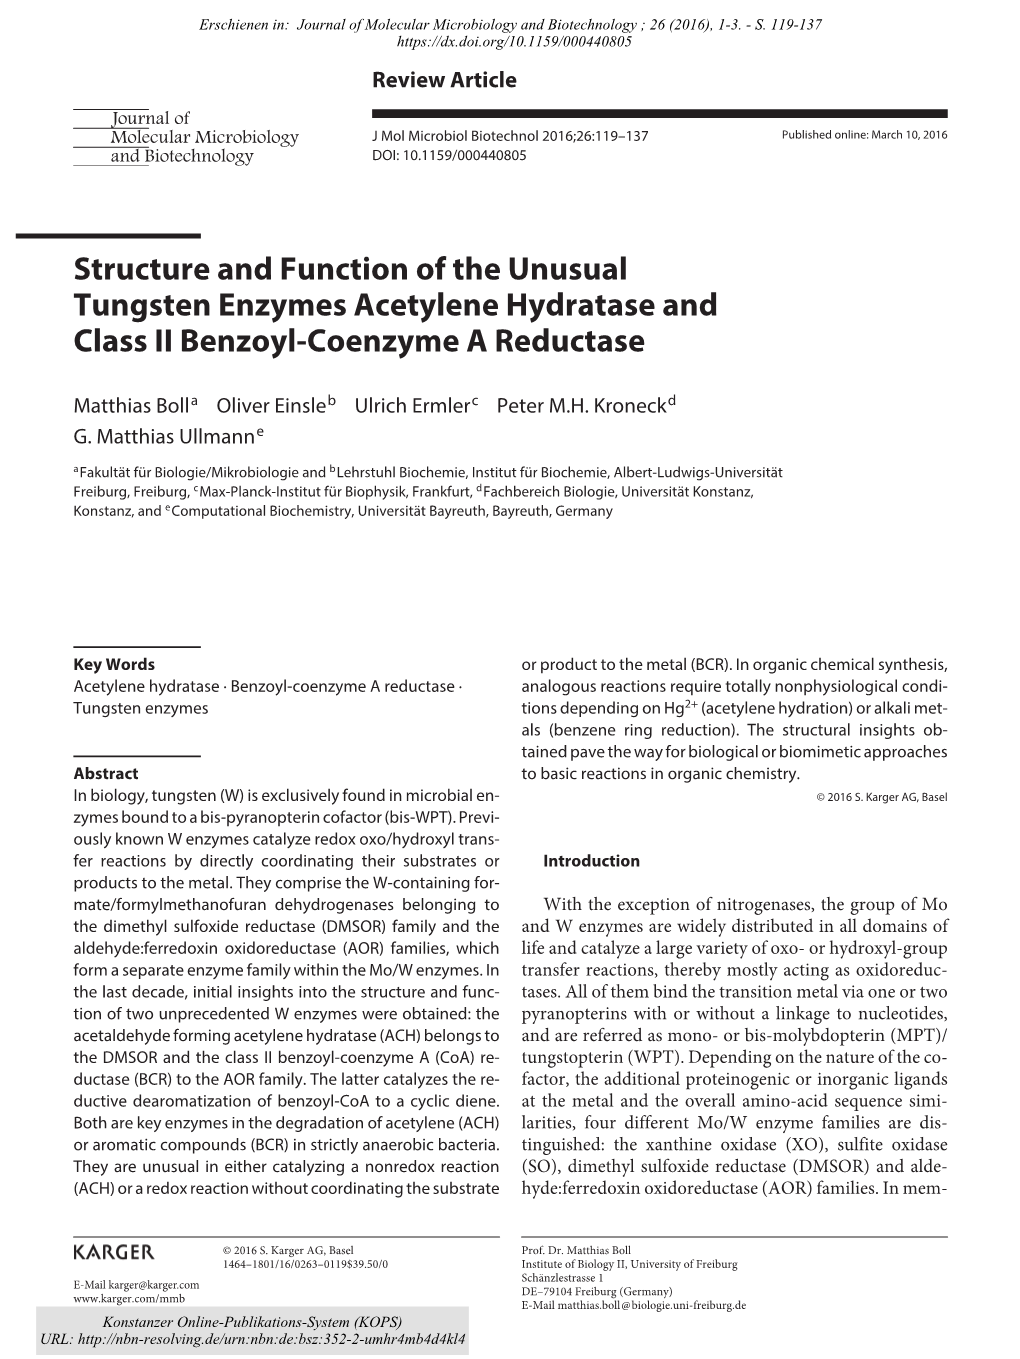 Structure and Function of the Unusual Tungsten Enzymes Acetylene Hydratase and Class II Benzoyl-Coenzyme a Reductase